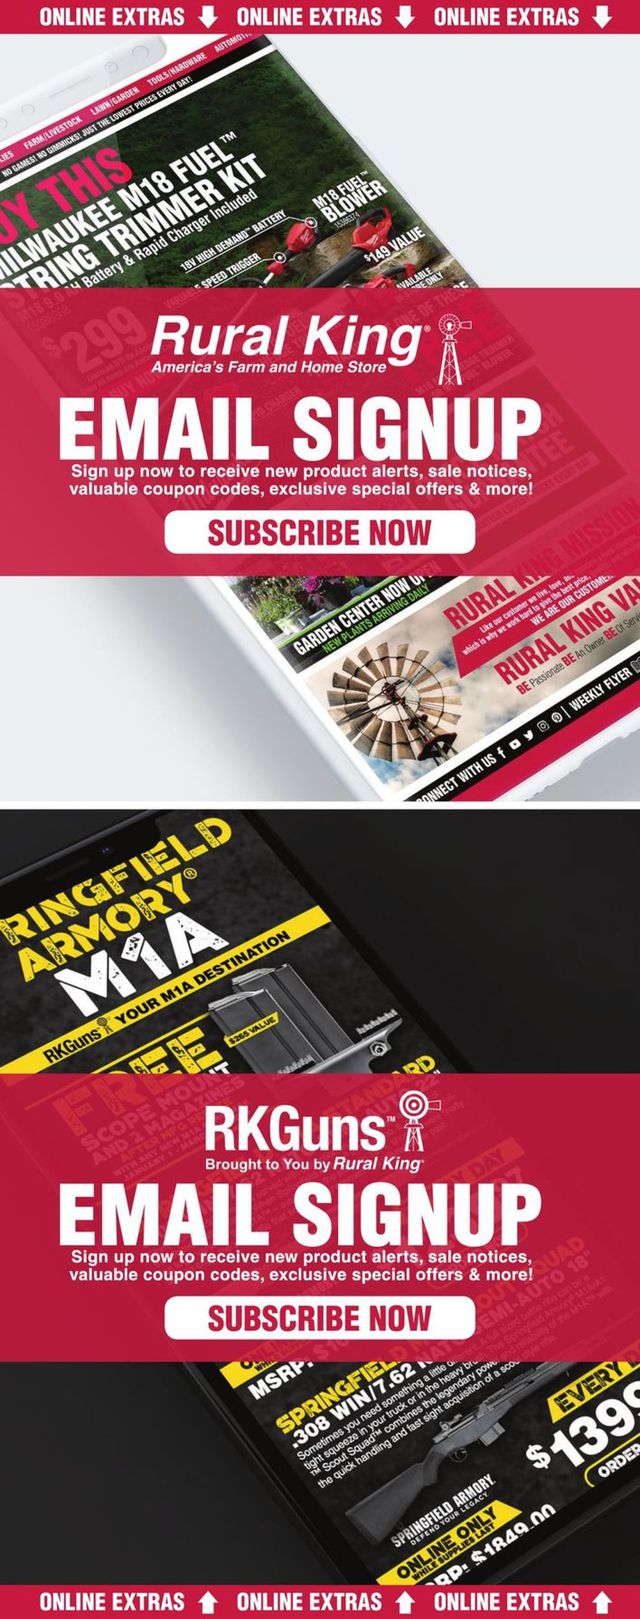 Rural King Ad from 10/27/2019